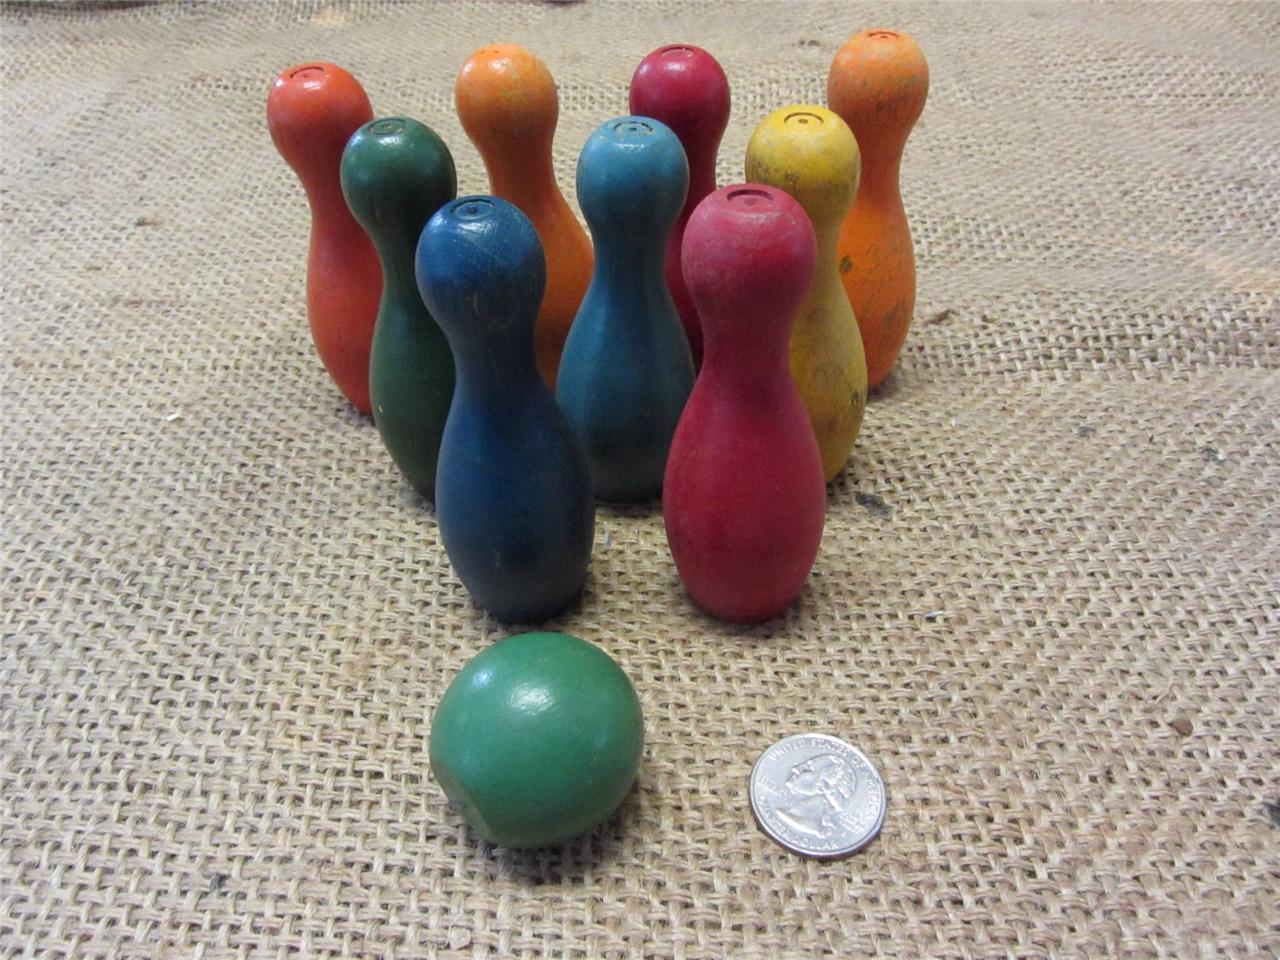 SALENEW very popular Vintage Miniature Bowling Pin Set > Bowl Wood Antique Old Popular product Wooden